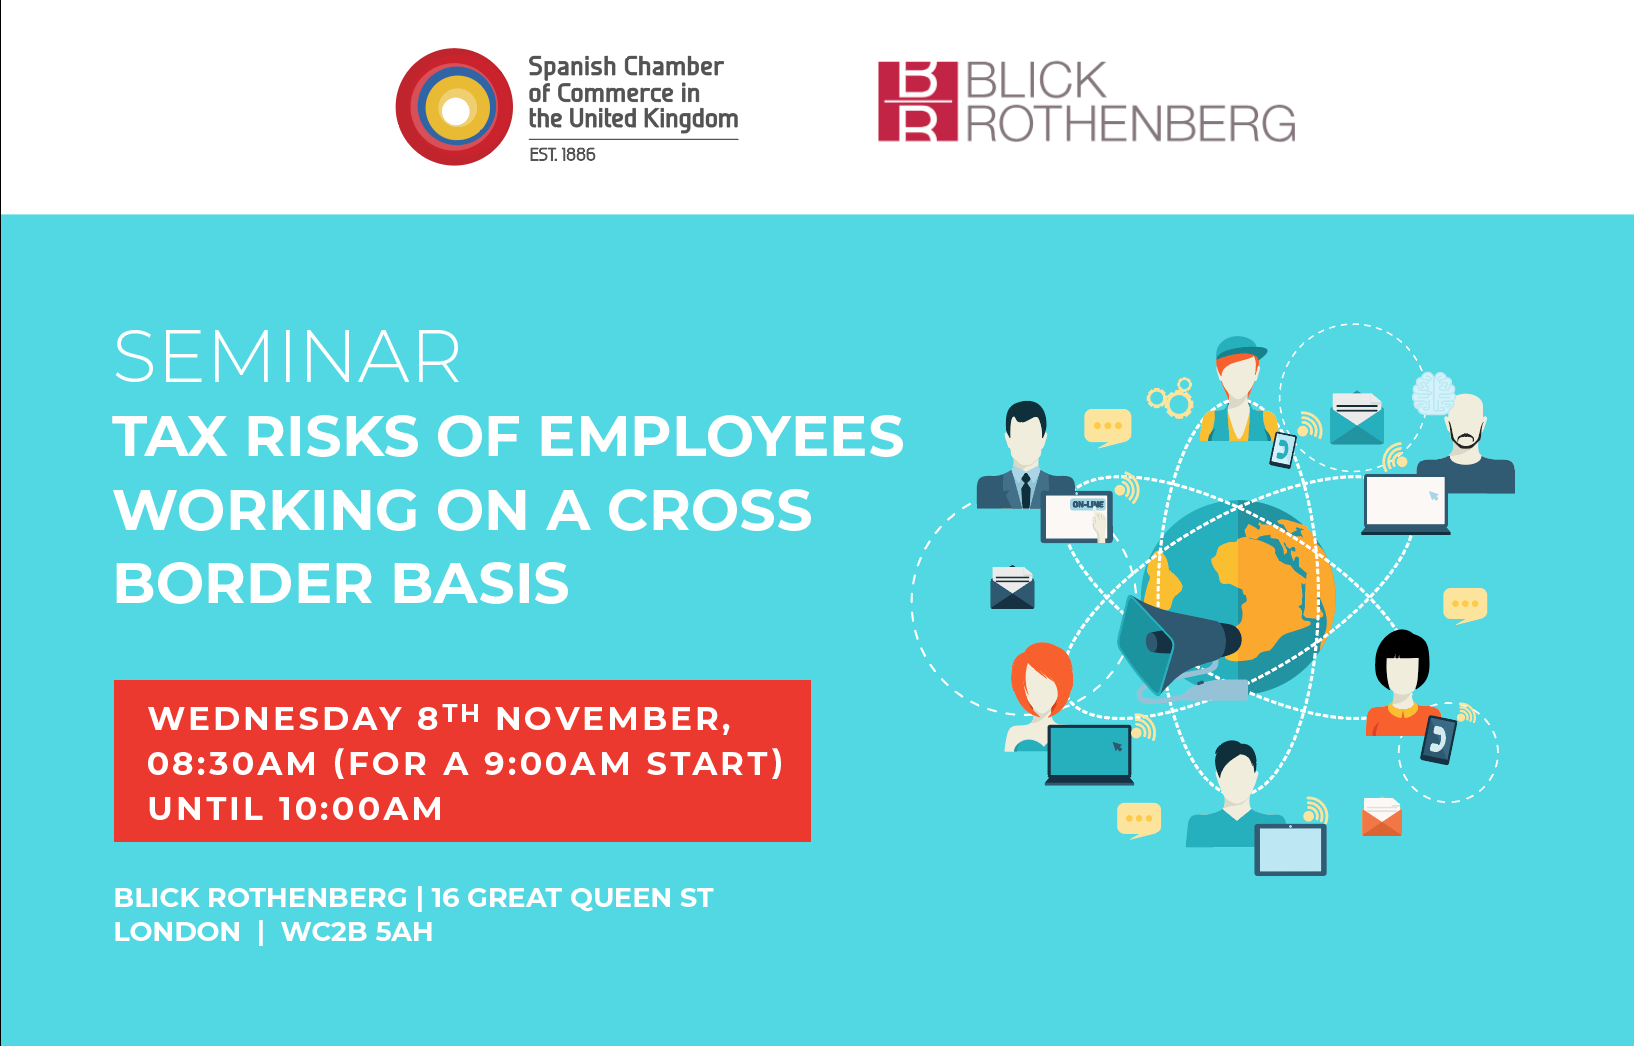 SEMINAR | TAX RISKS OF EMPLOYEES WORKING ON A CROSS BORDER BASIS